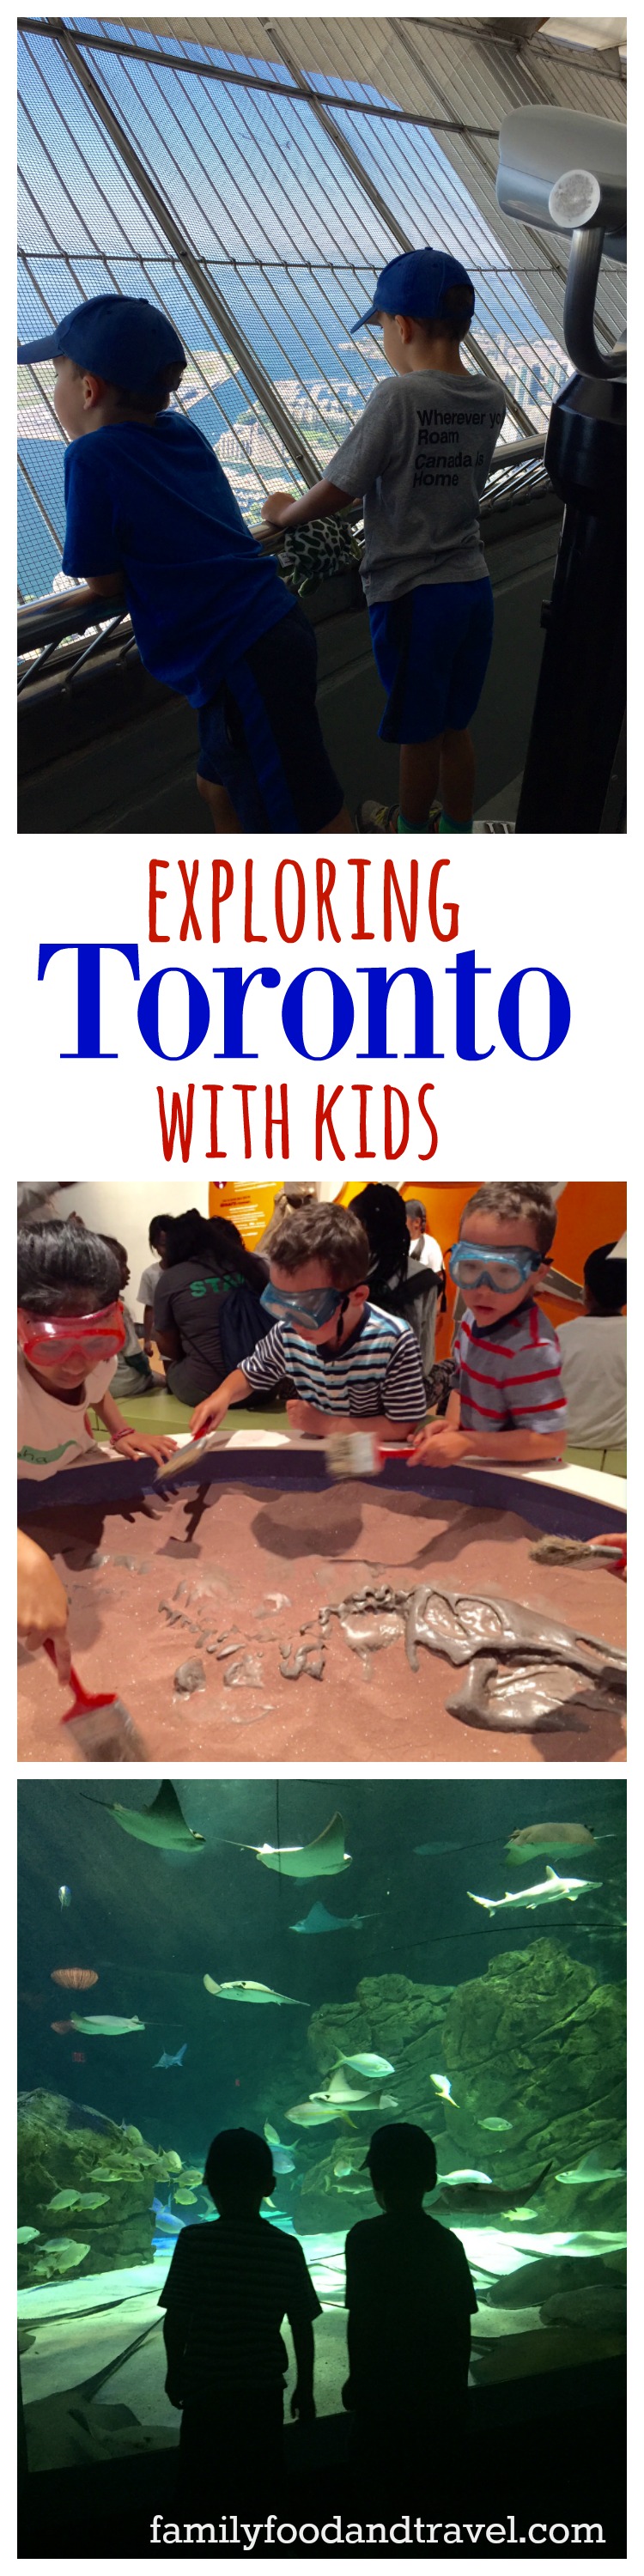 visiting Toronto with Kids